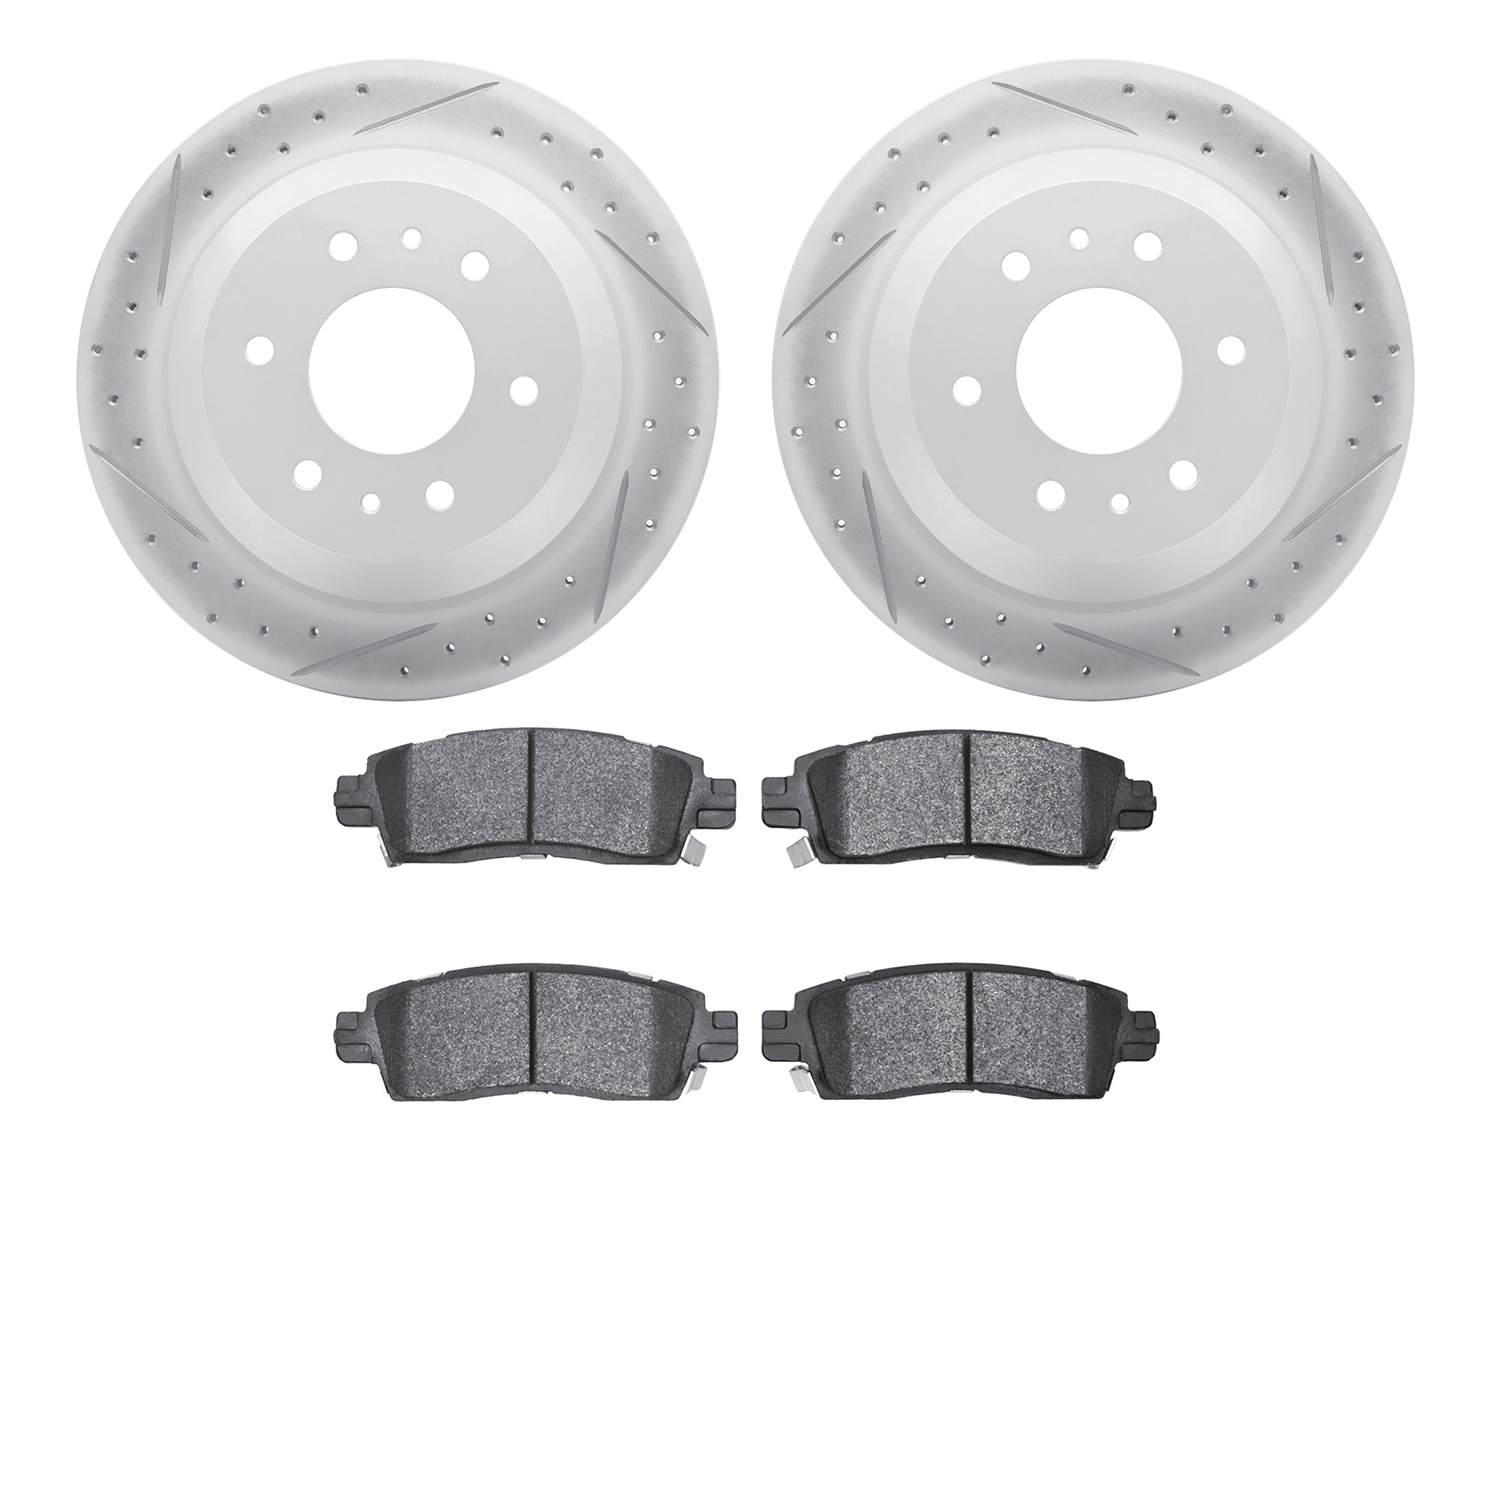 2502-48030 Geoperformance Drilled/Slotted Rotors w/5000 Advanced Brake Pads Kit, 2002-2009 GM, Position: Rear